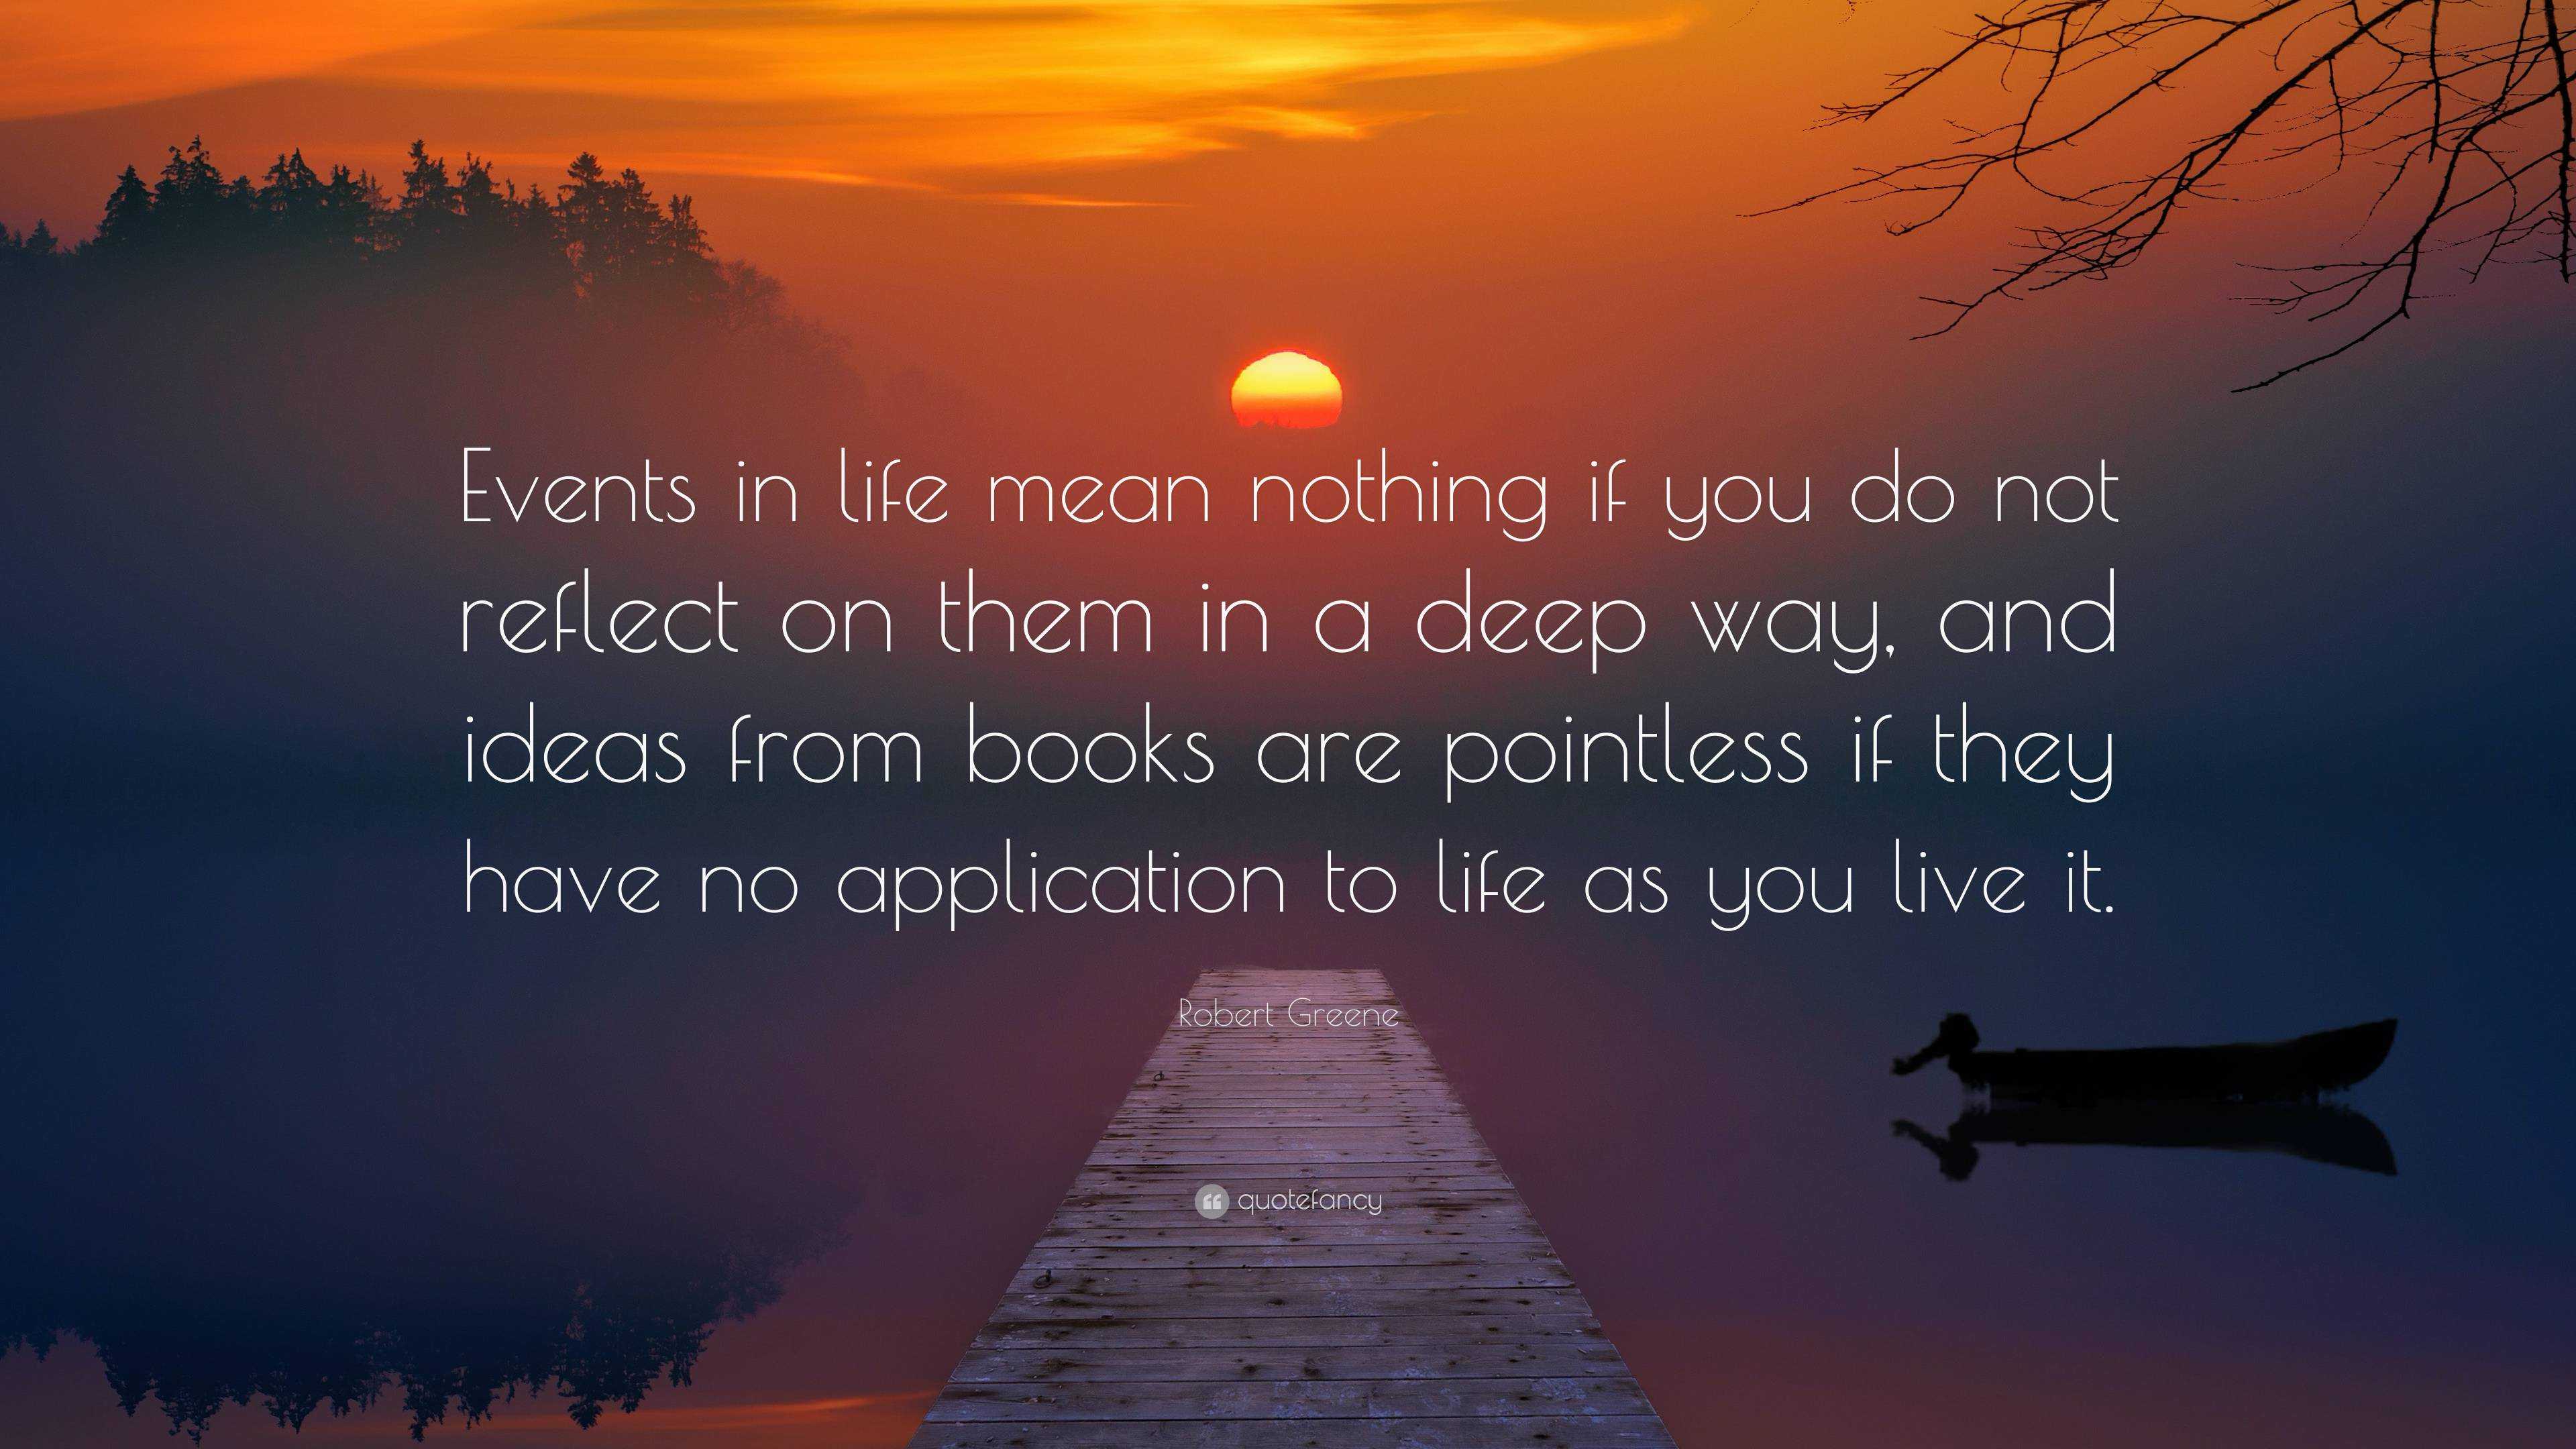 Robert Greene Quote: “Events in life mean nothing if you do not reflect ...